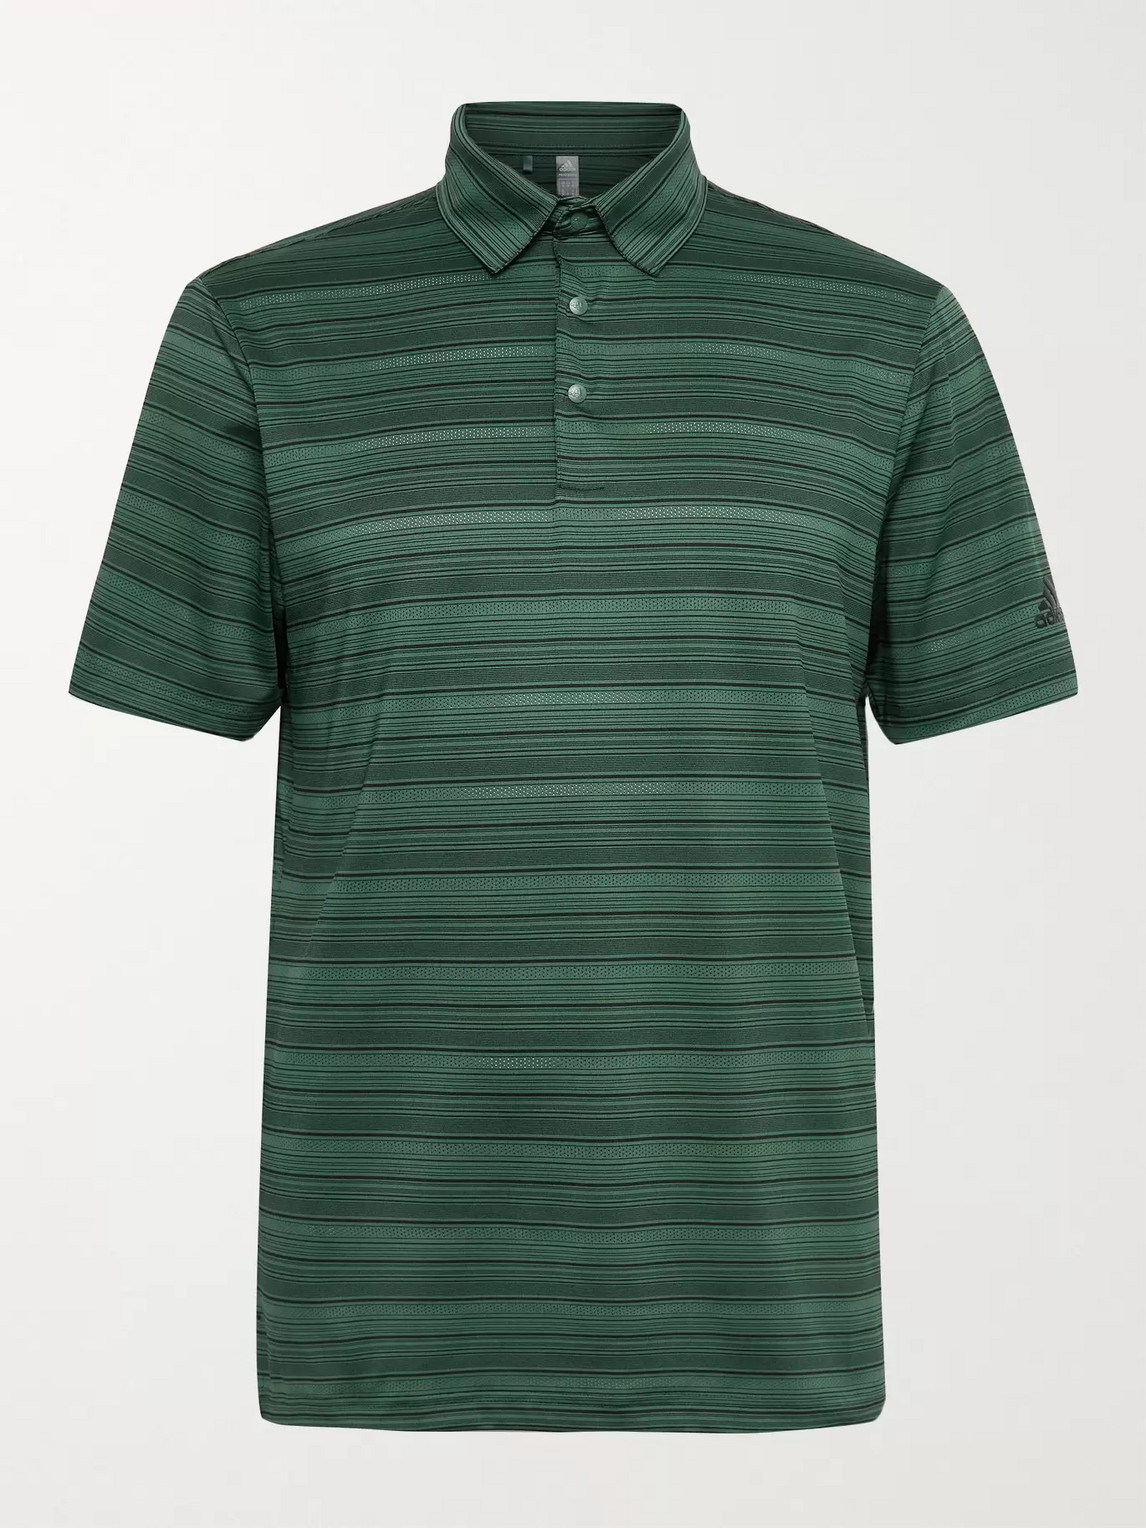 Adidas Golf Striped Recycled Stretch-jersey And Mesh Golf Polo Shirt In Green